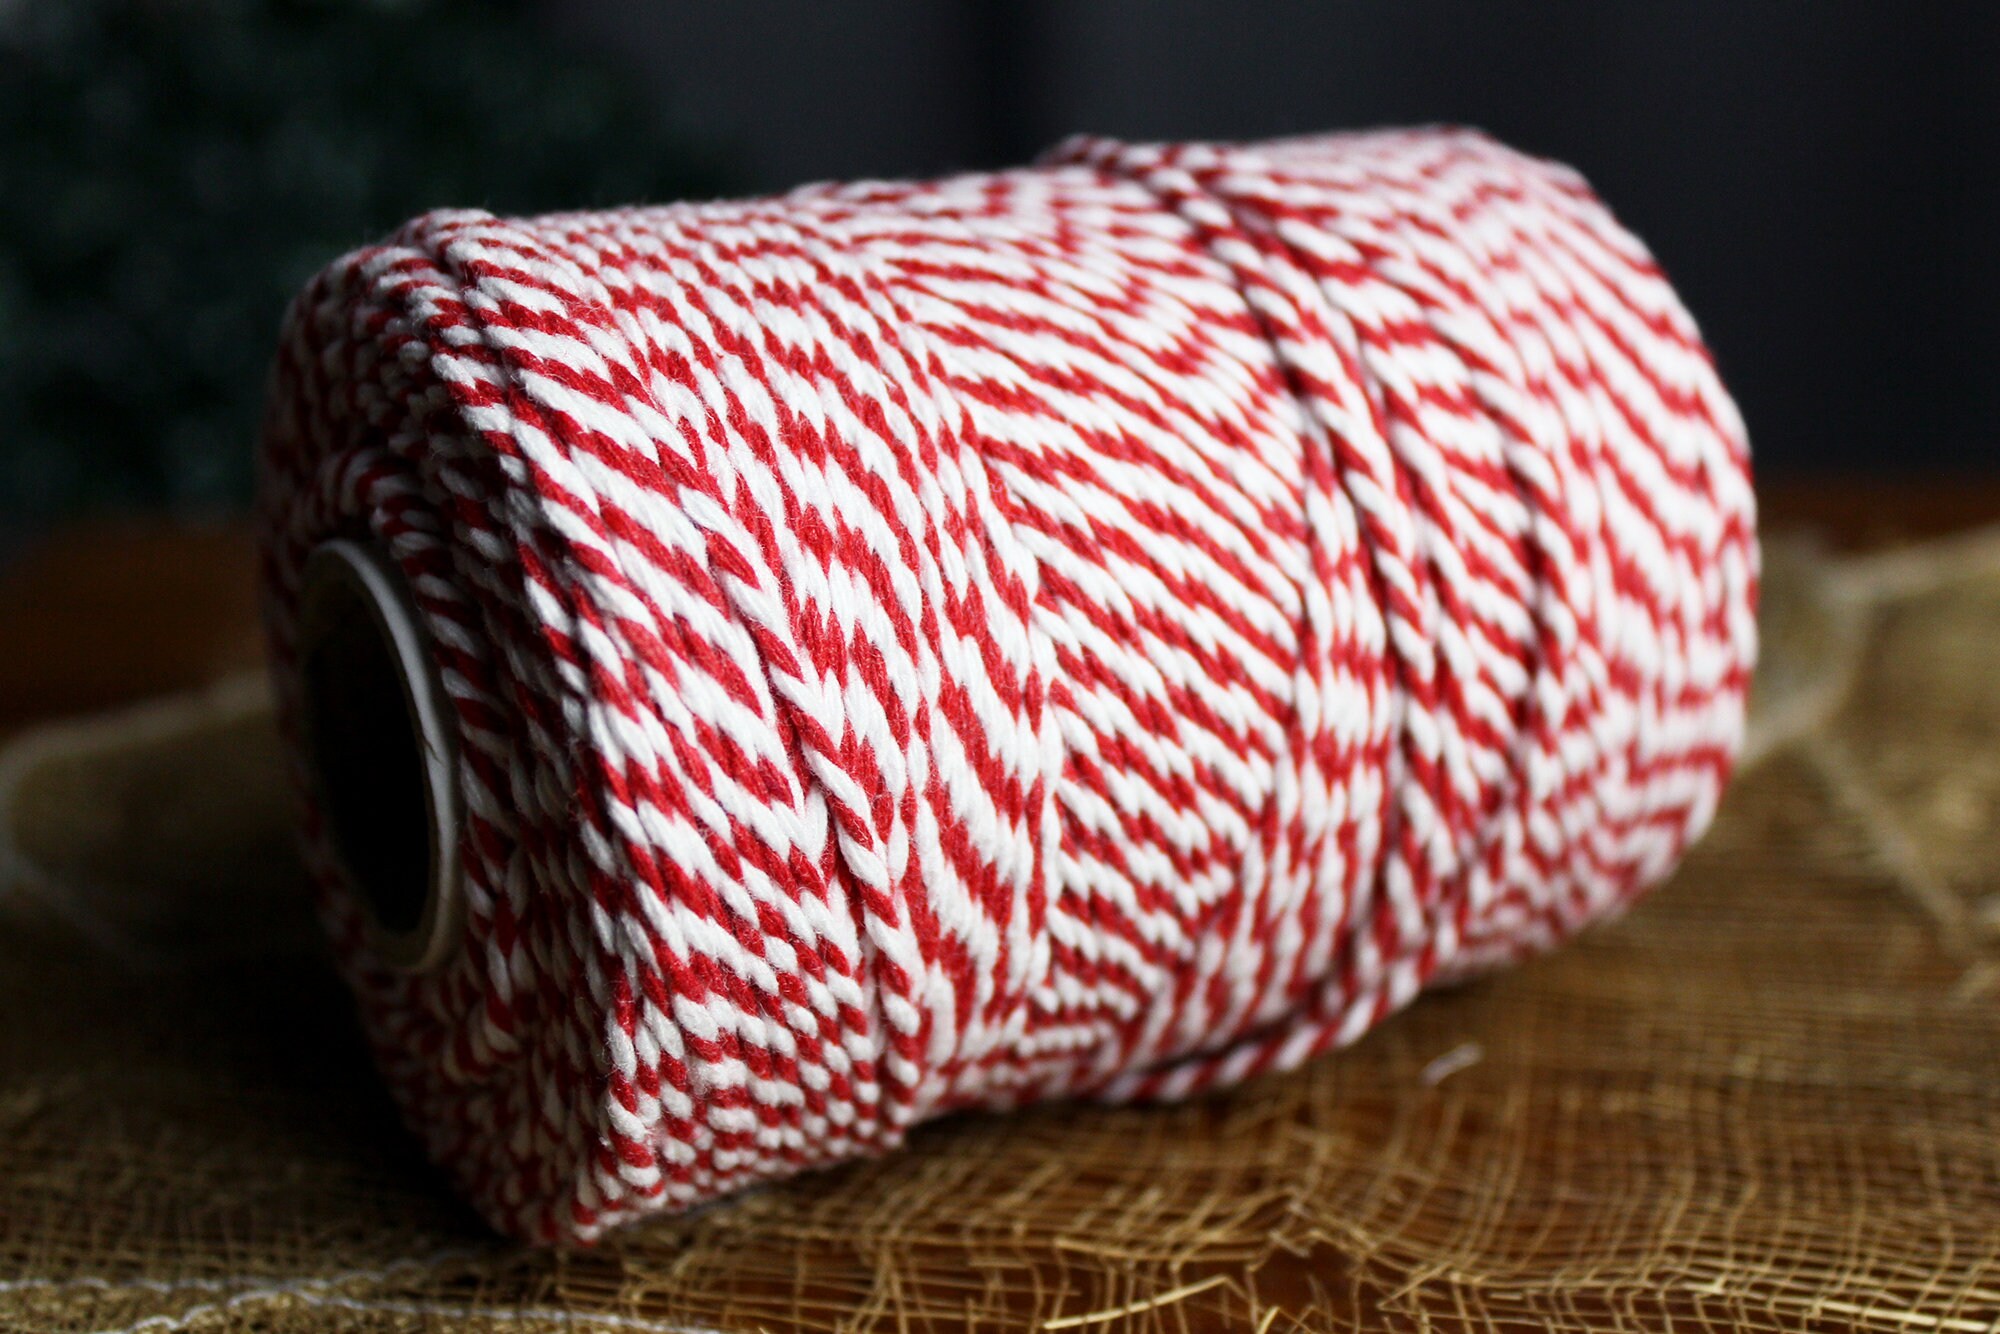 100m Chunky Red & White String Cord Christmas Gift Wrap Candy Cane